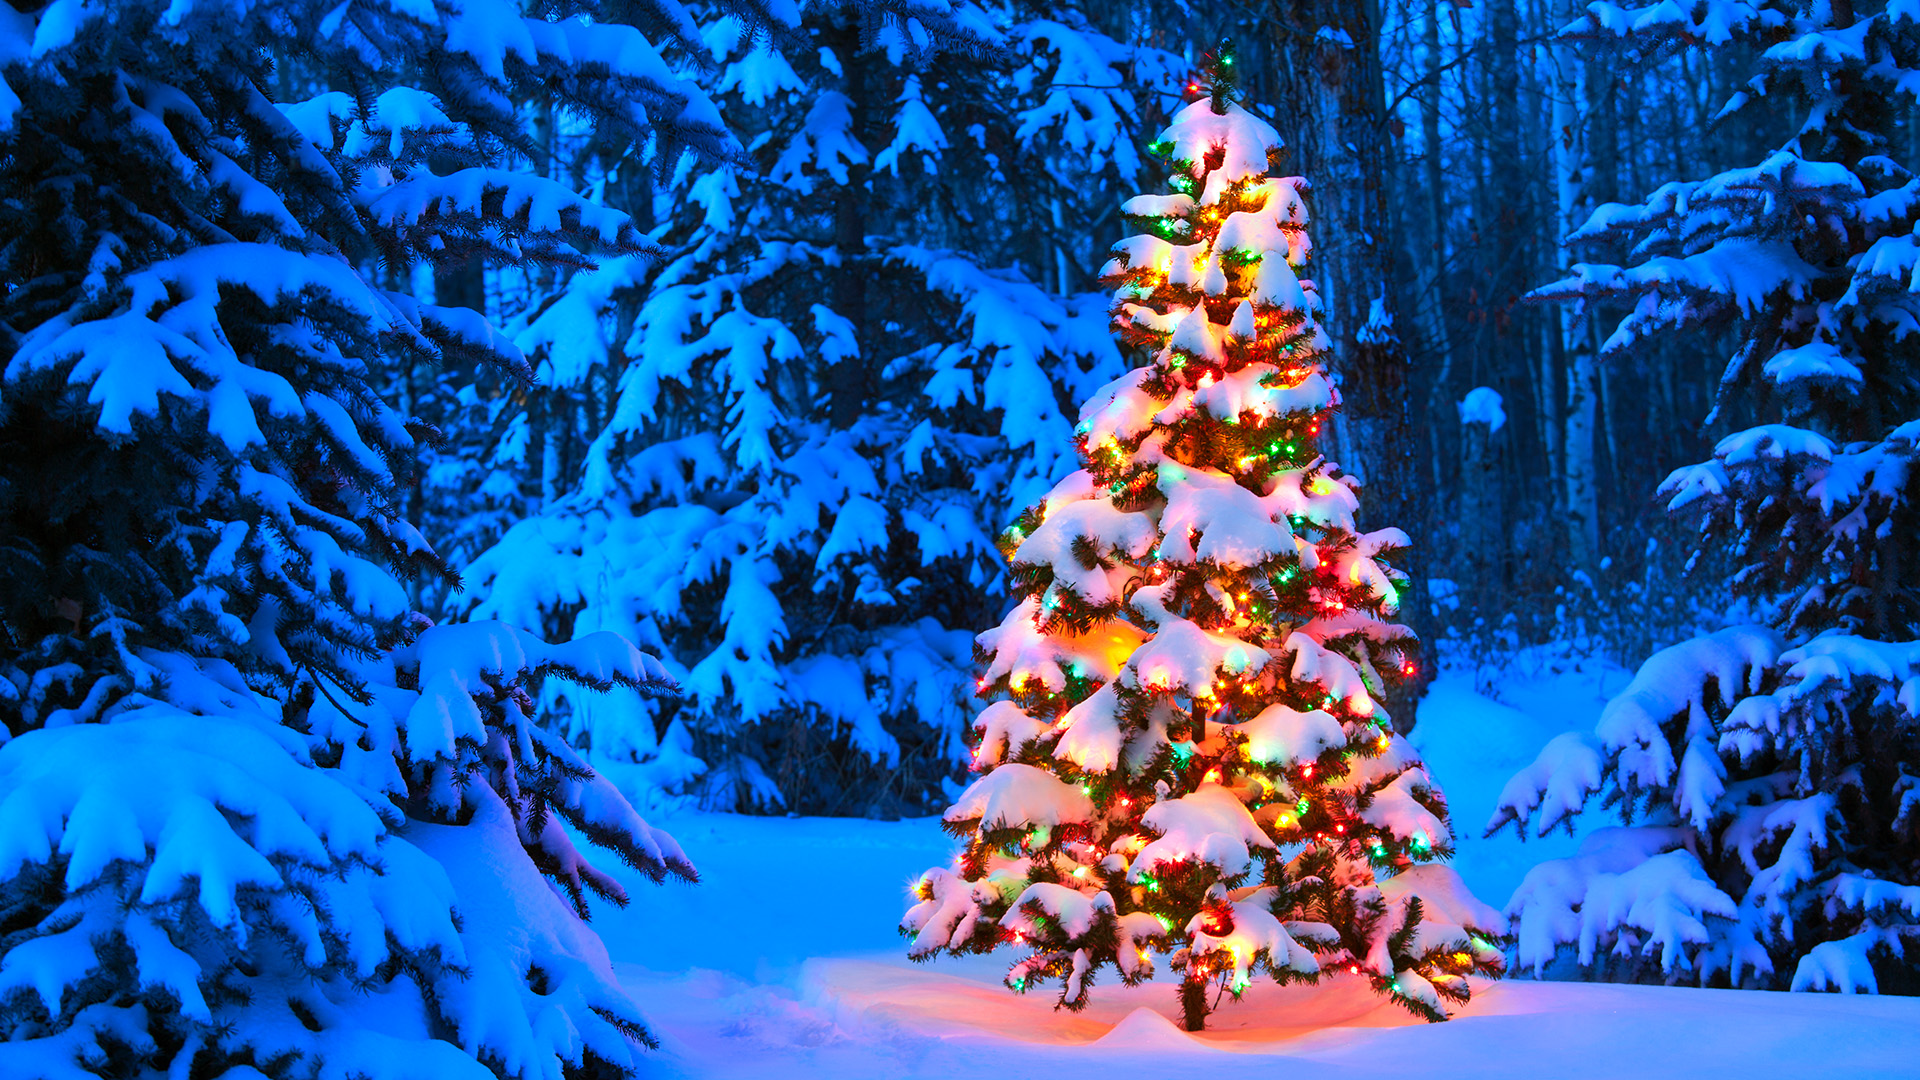 Christmas tree glowing outdoors in the forest at dusk | Windows ...